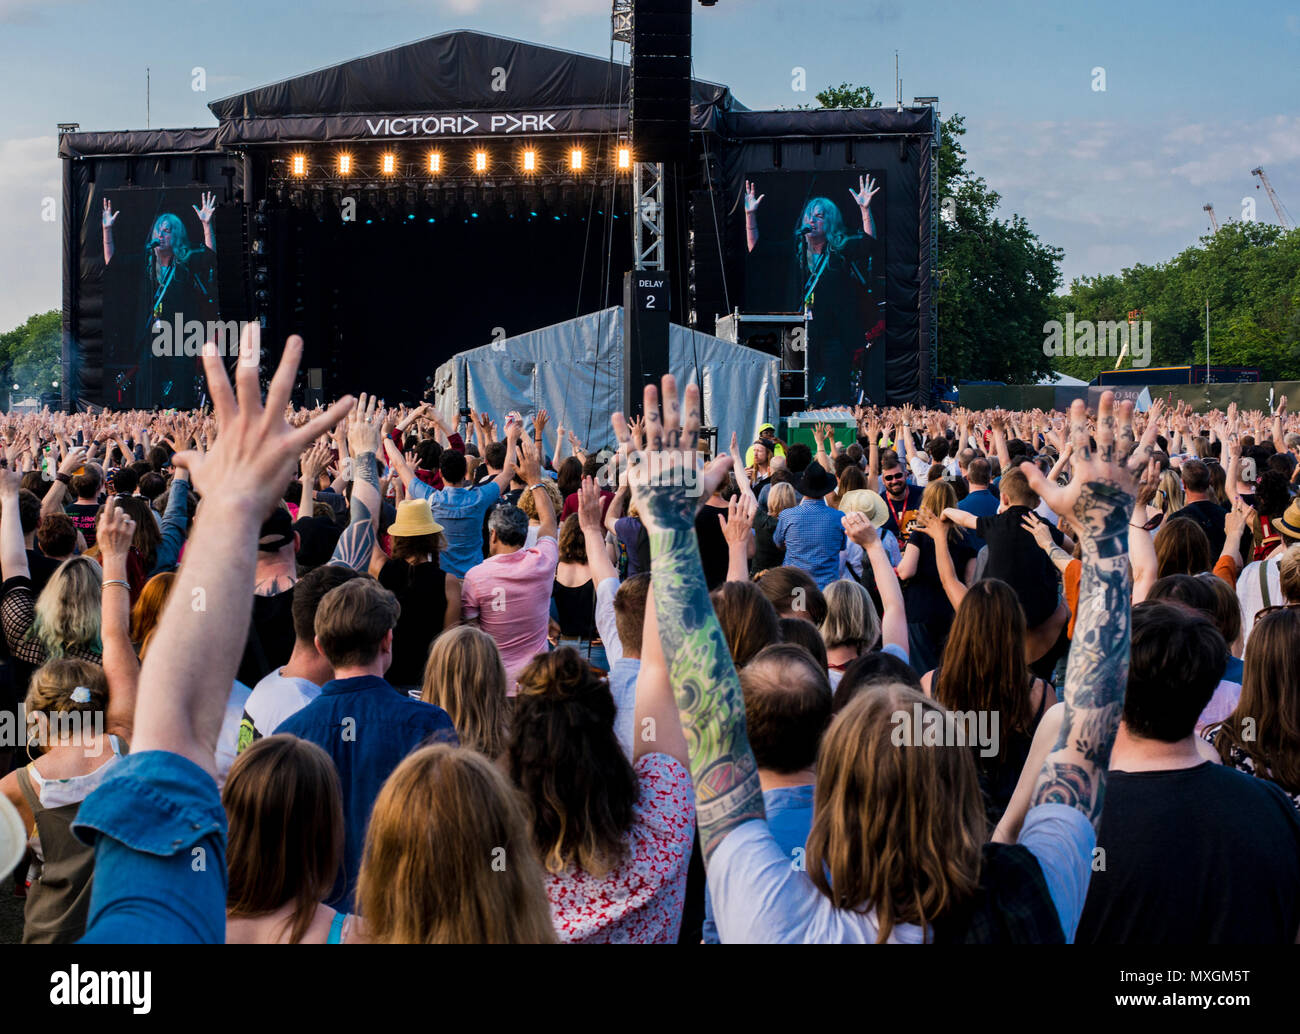 Crowd raise their hands, while Patti Smith plays at the All Points East music festival, 3rd June 2018, Victoria Park, London, England, UK Stock Photo